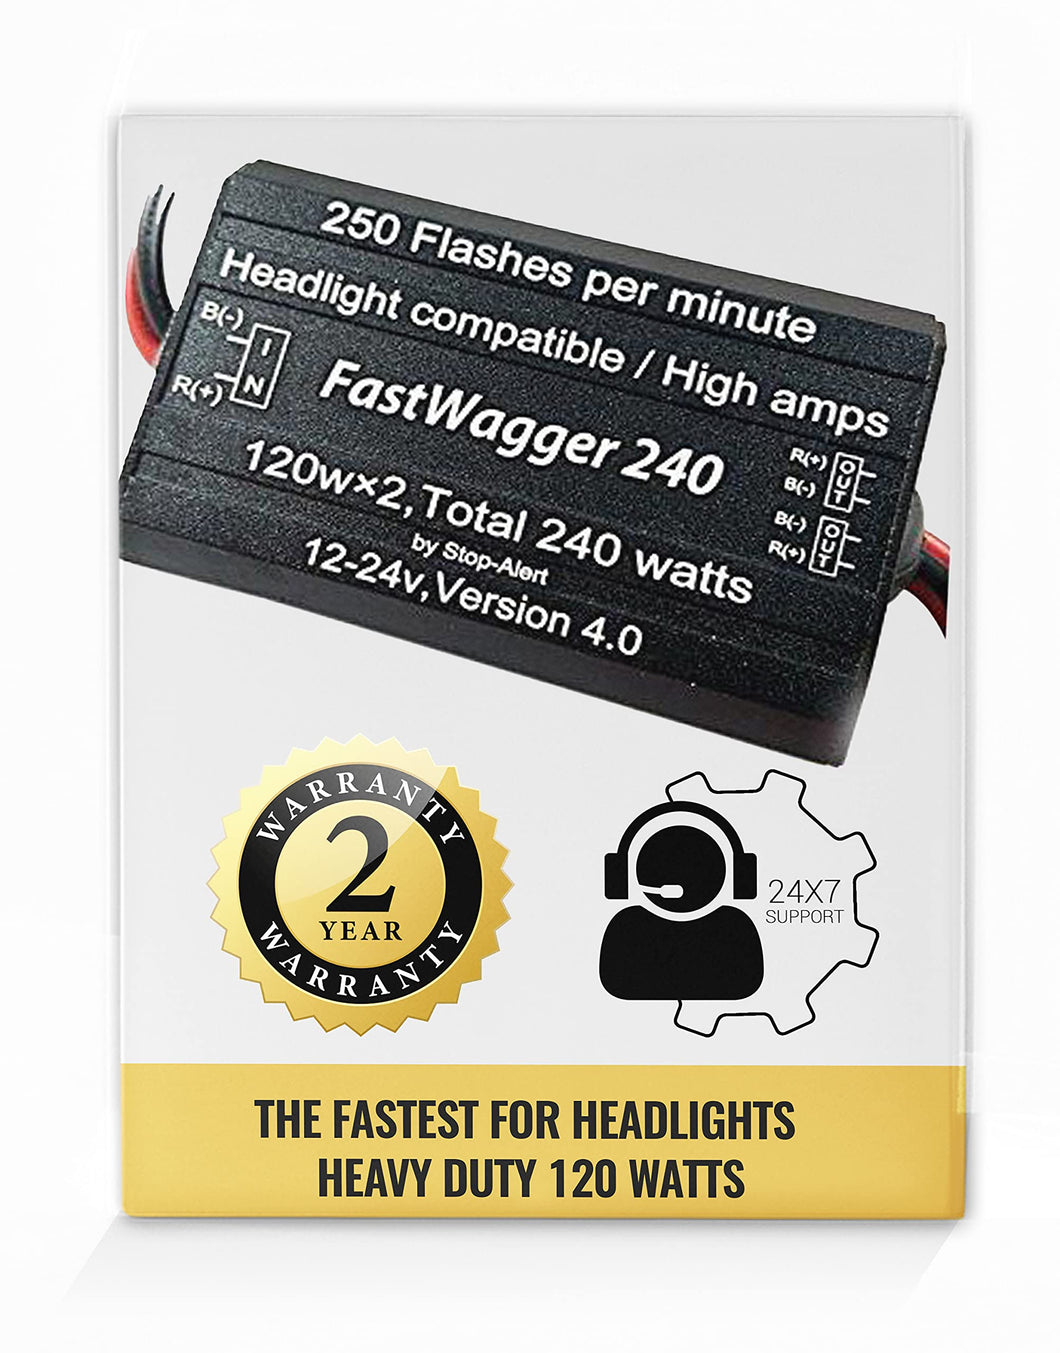 FastWagger 240w - Headlight Safety alternating flasher module electronic Wig Wag strobe controller relay - LED Incandescent Xenon Halogen HID Car Police Emergency Trucks 10A 12-24V 250FPM Stop-Alert